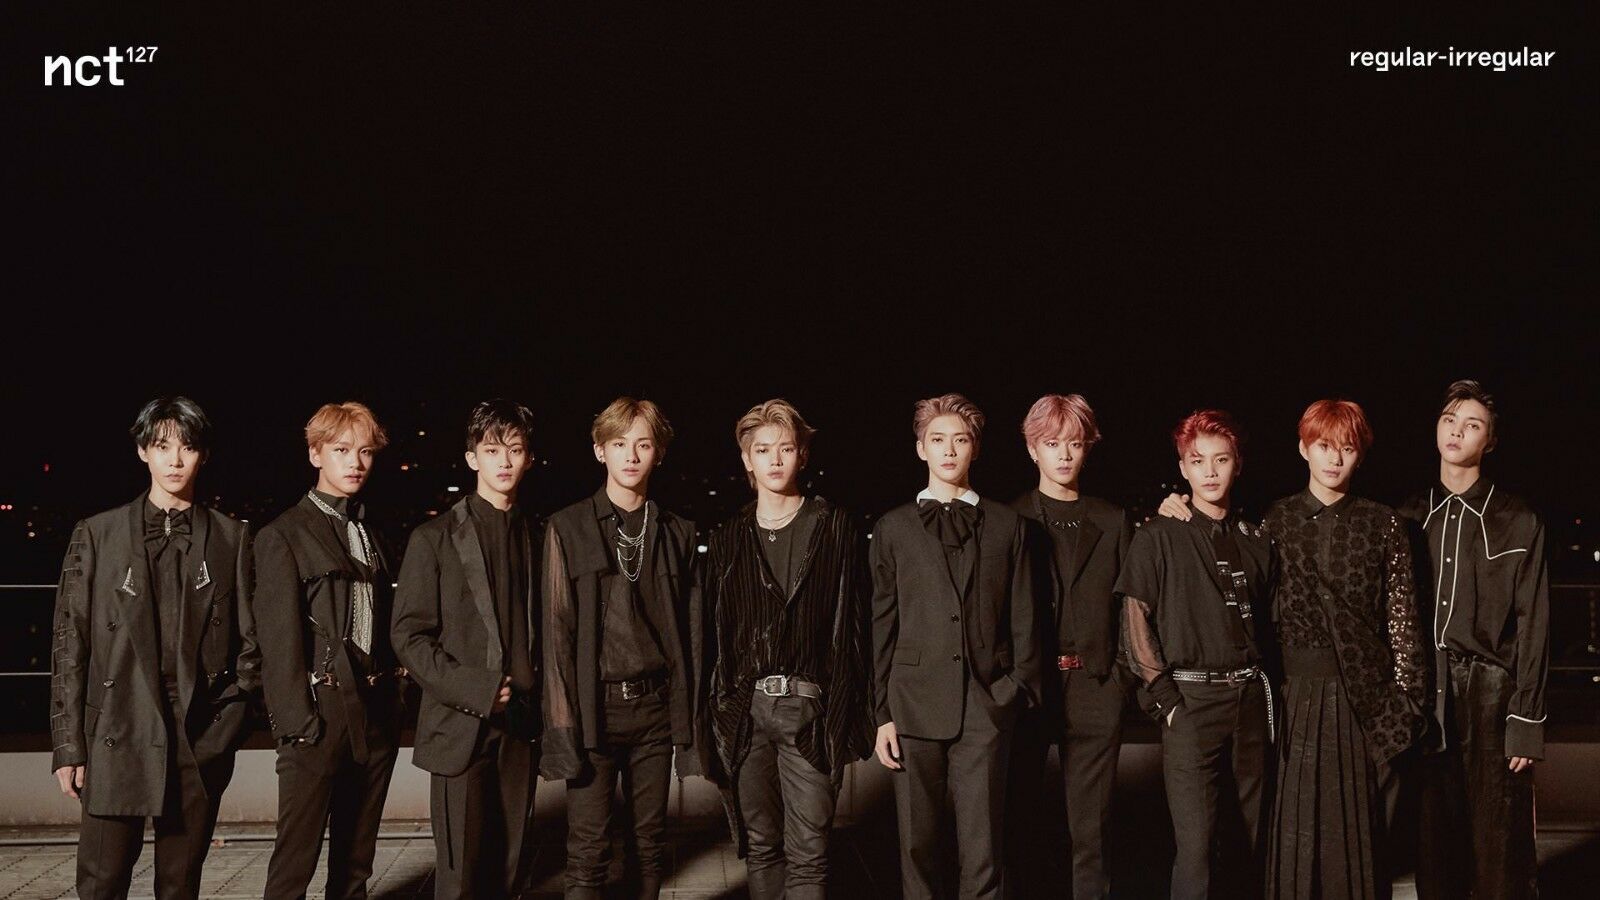 NCT 127, first regular album 'NCT #127 Regular-Irregular' released on October 12th! Heat up the music industry in the seco...